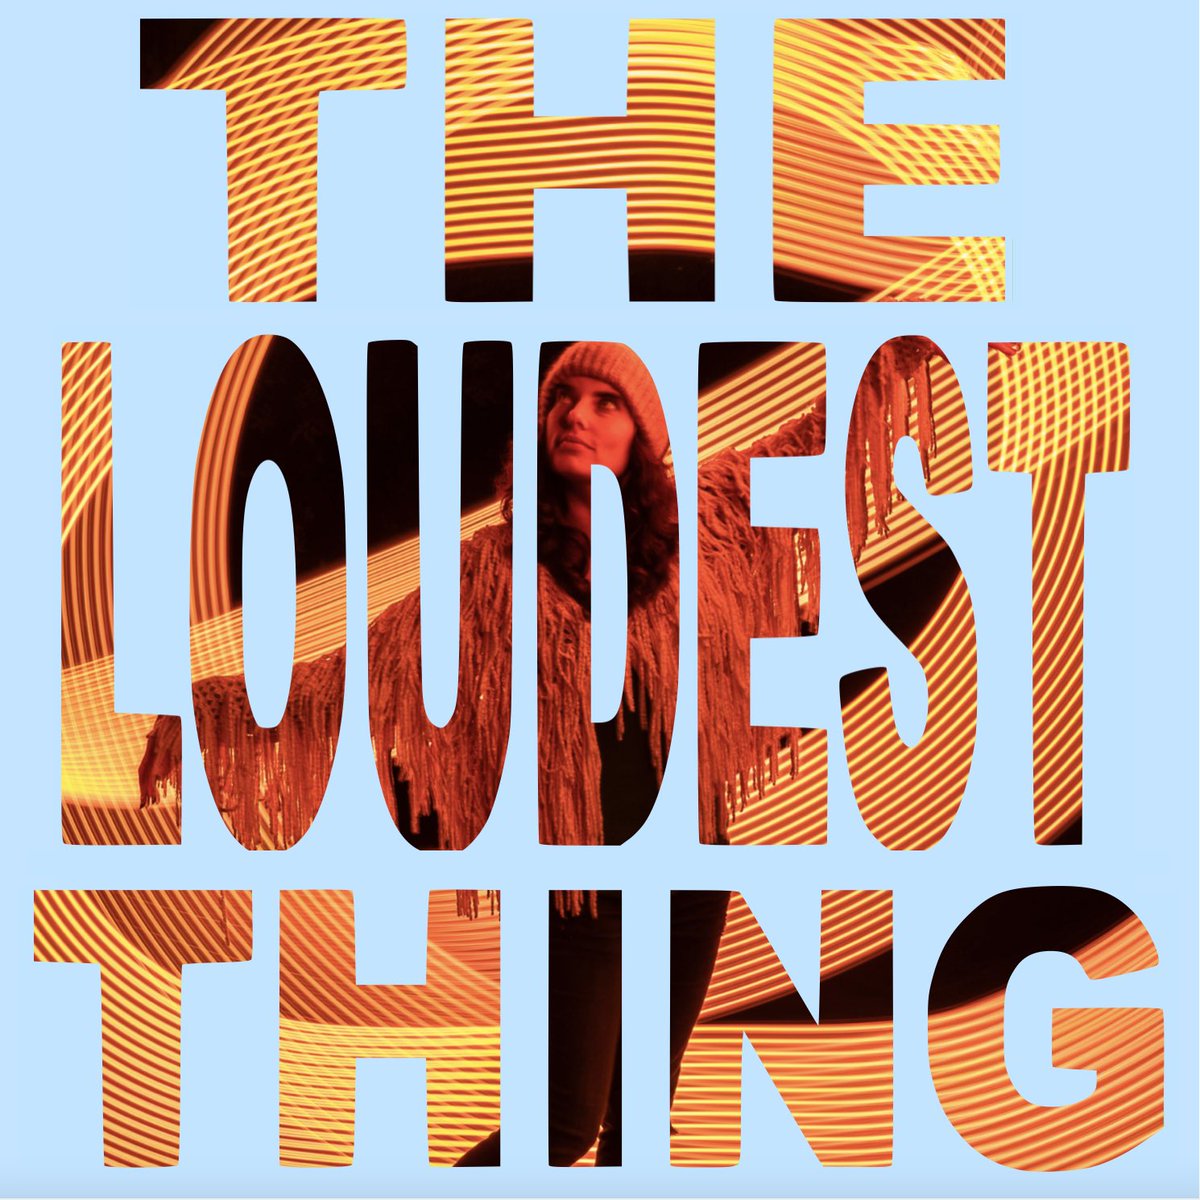 “THE LOUDEST THING” is out now! 🎧#Turnitup & spin it on repeat on Spotify and Apple Music and let’s make #love (and this song) the loudest! Saving, sharing, & adding to playlists on the first day make a big difference! Use it in a post, tag me & I’ll share! #newmusicrelease